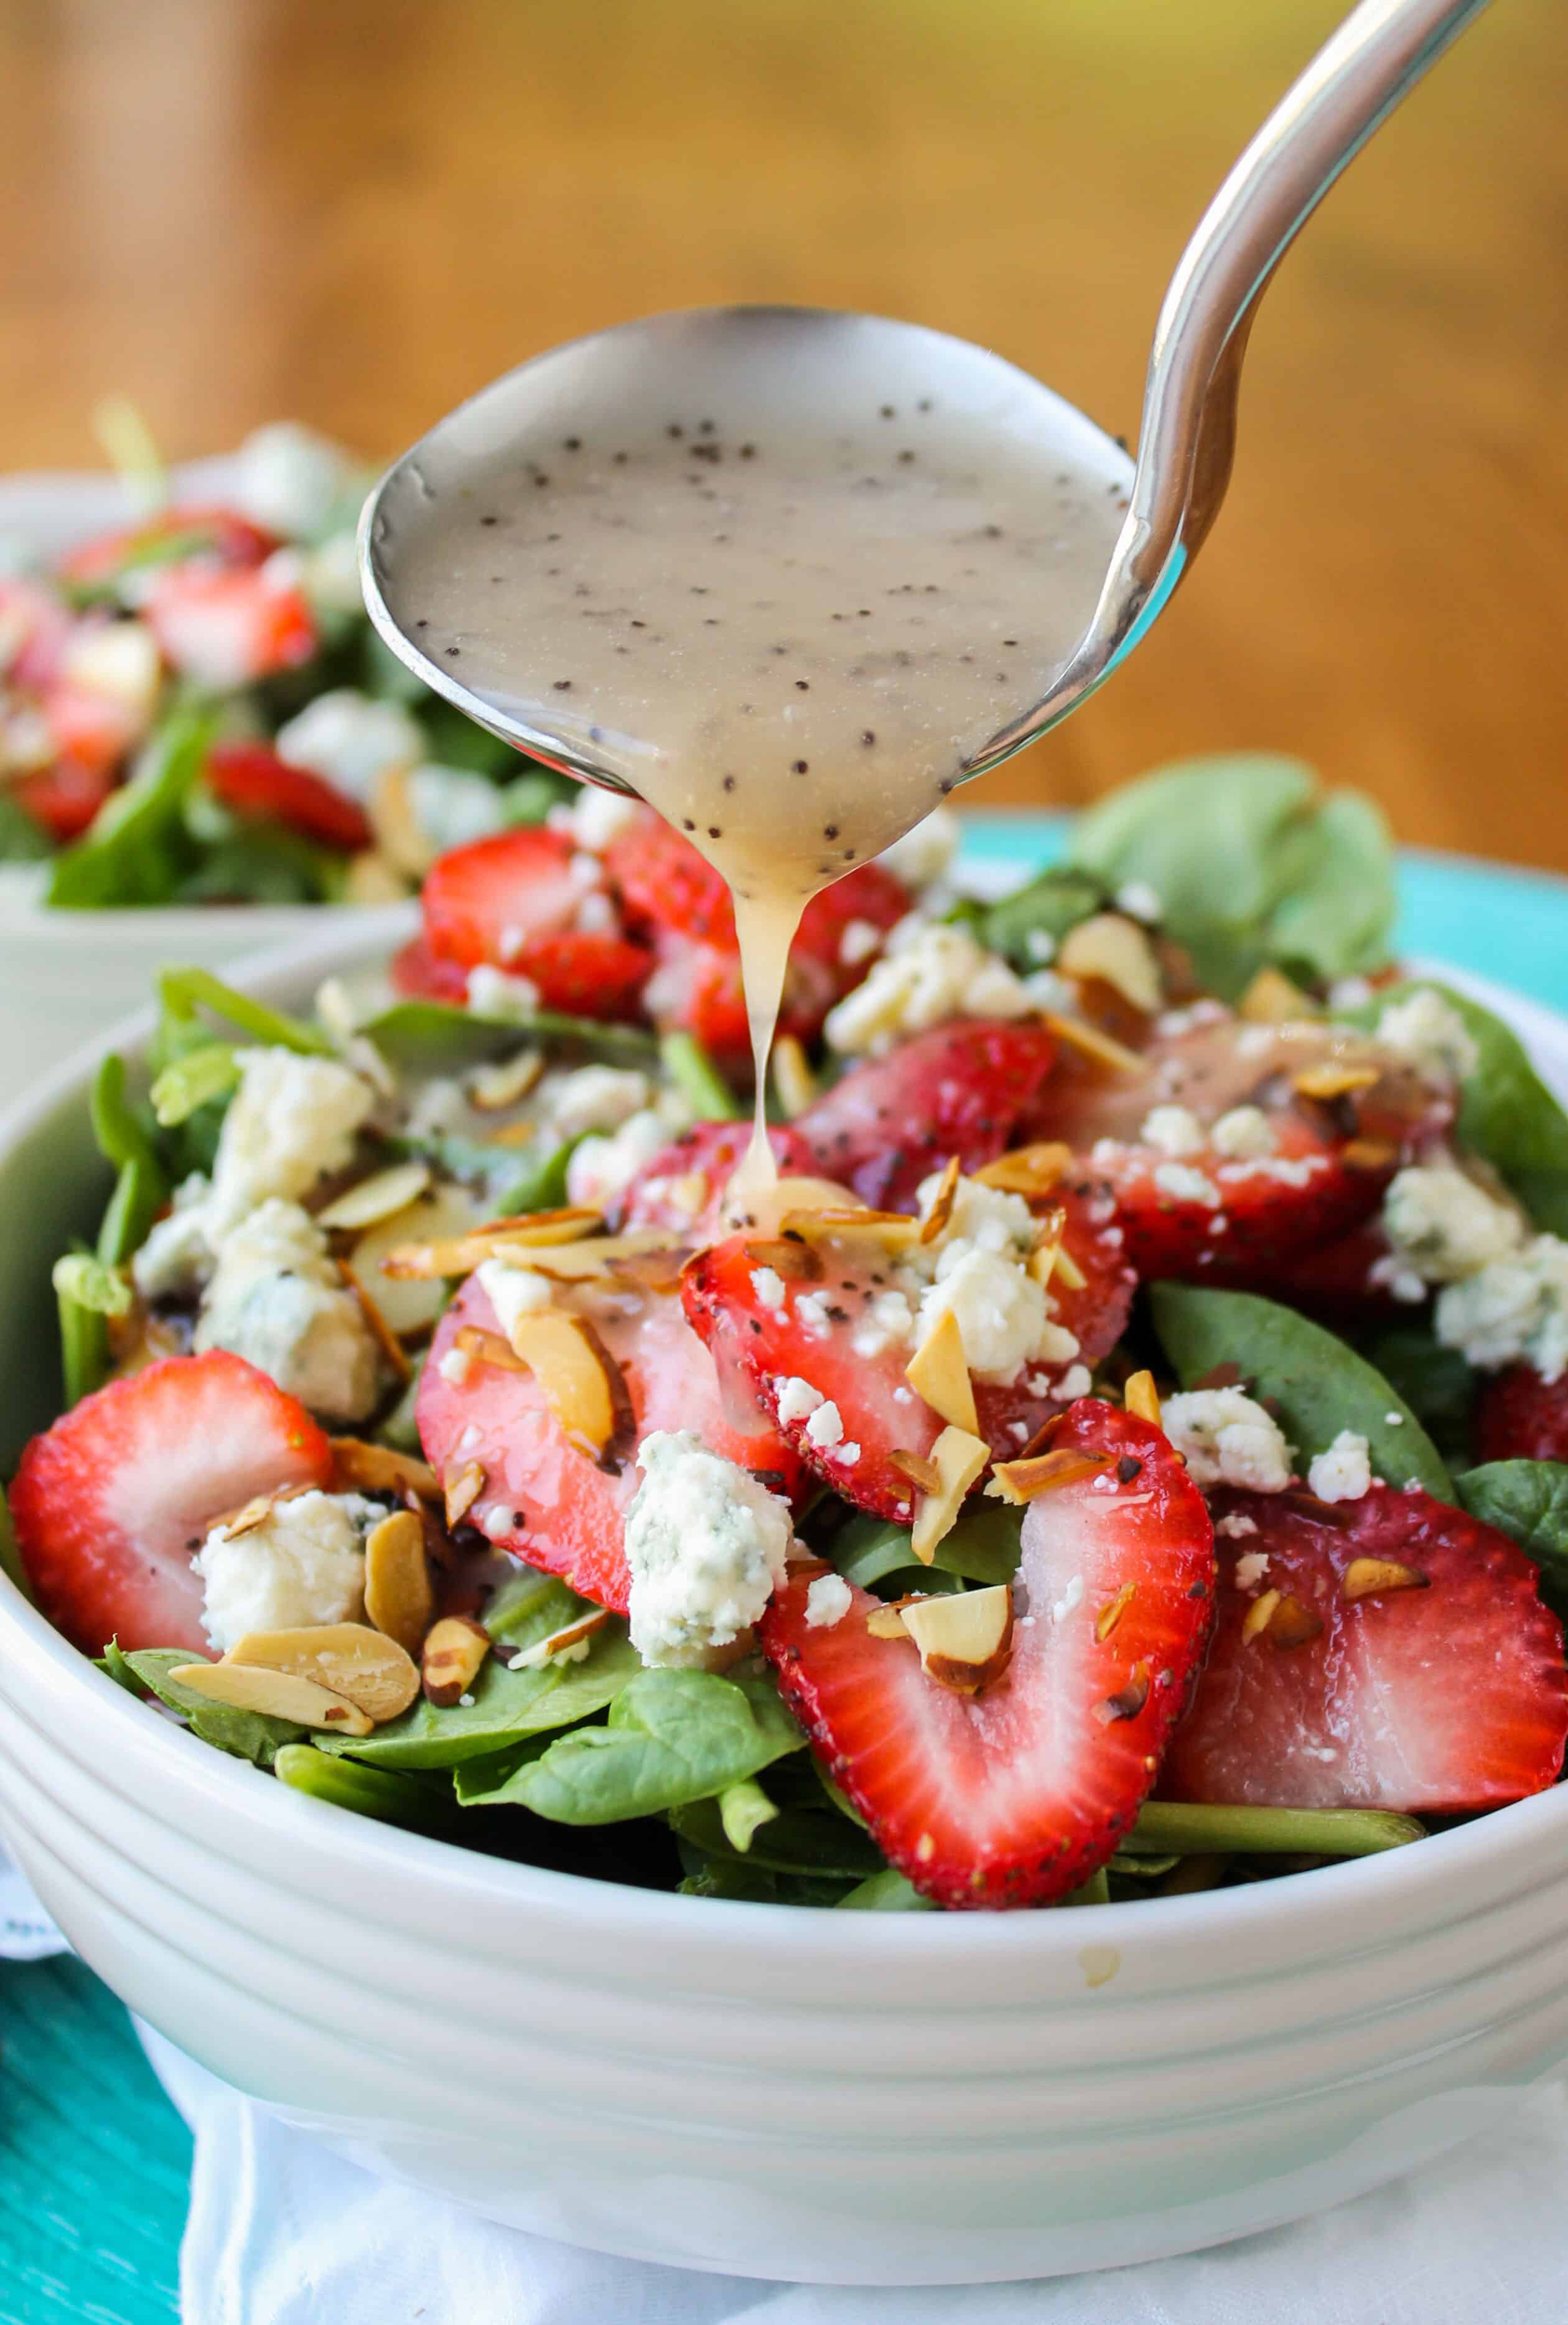 Copycat Cafe Zupas Copycat Cafe Zupas Poppyseed Dressing and Spinach Bleu Cheese Salad // The Food Charlatan